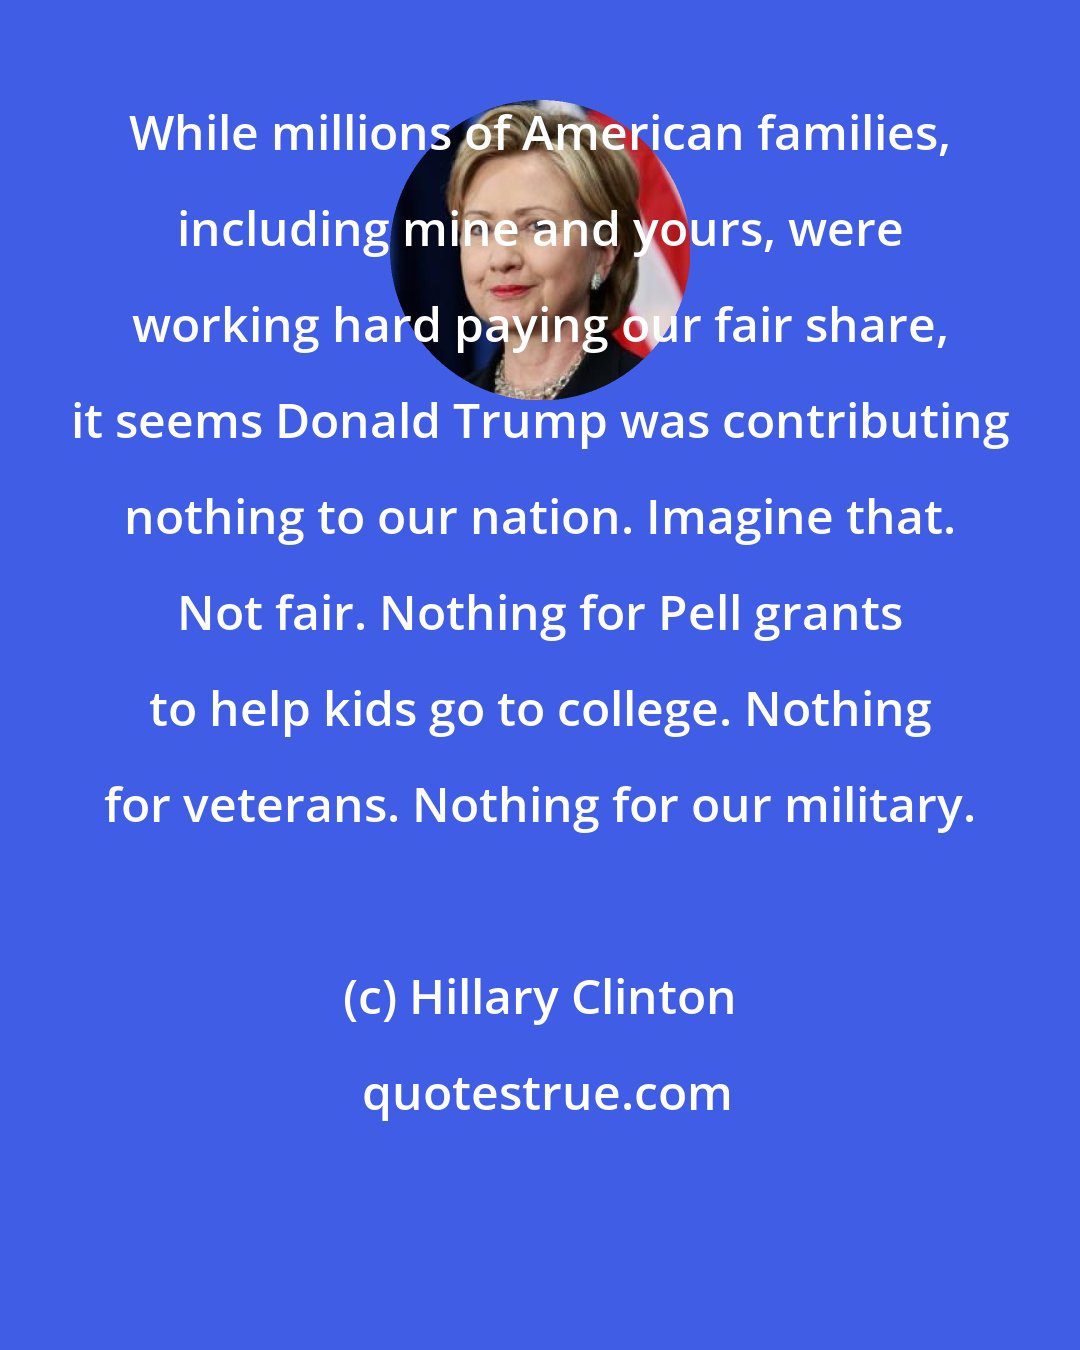 Hillary Clinton: While millions of American families, including mine and yours, were working hard paying our fair share, it seems Donald Trump was contributing nothing to our nation. Imagine that. Not fair. Nothing for Pell grants to help kids go to college. Nothing for veterans. Nothing for our military.